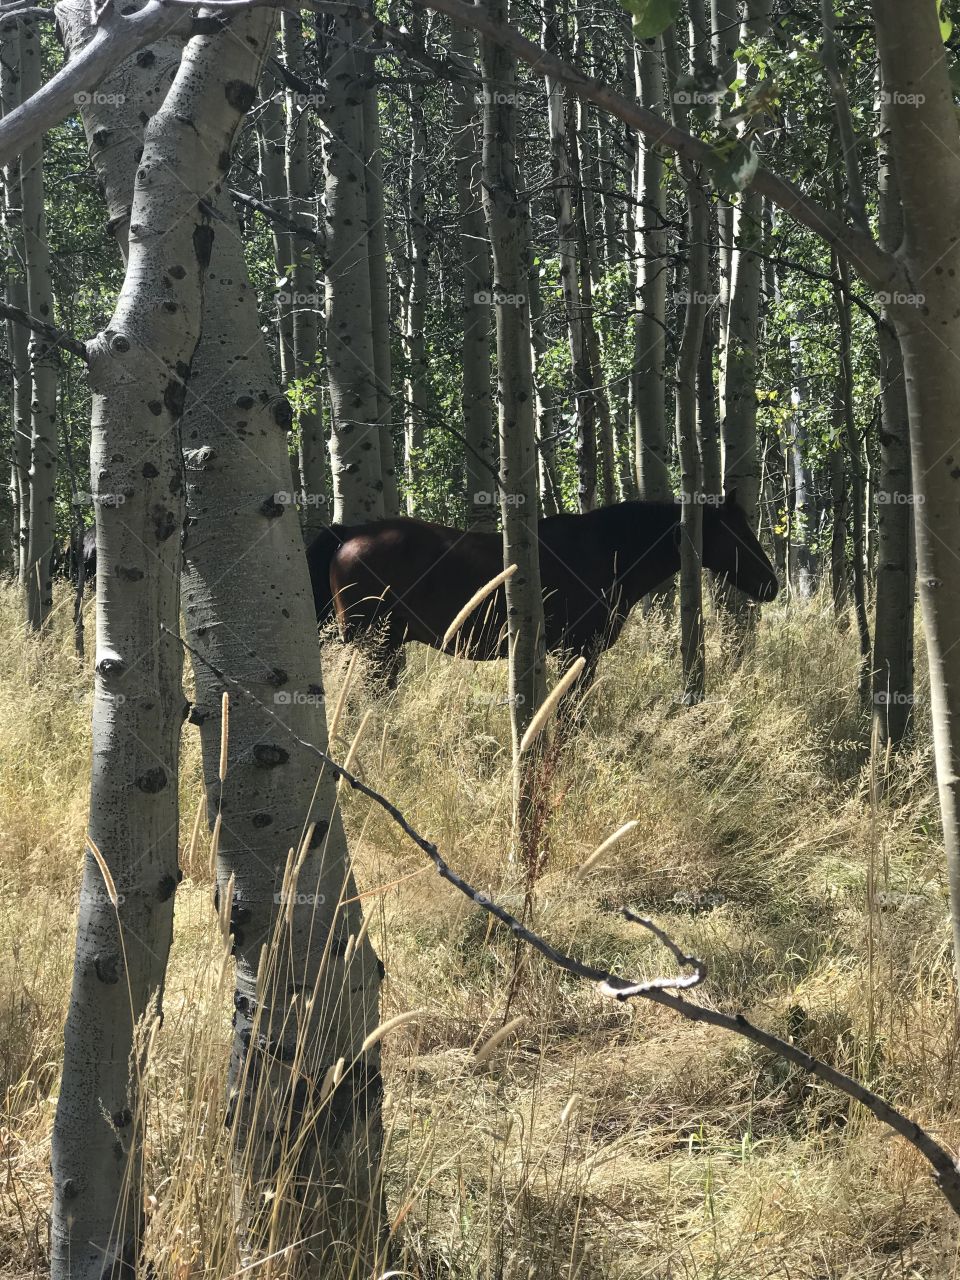 Trying to grab the attention of a beautiful brown mare grazing in the dry grass. The birch trees provide her safety from onlookers. 